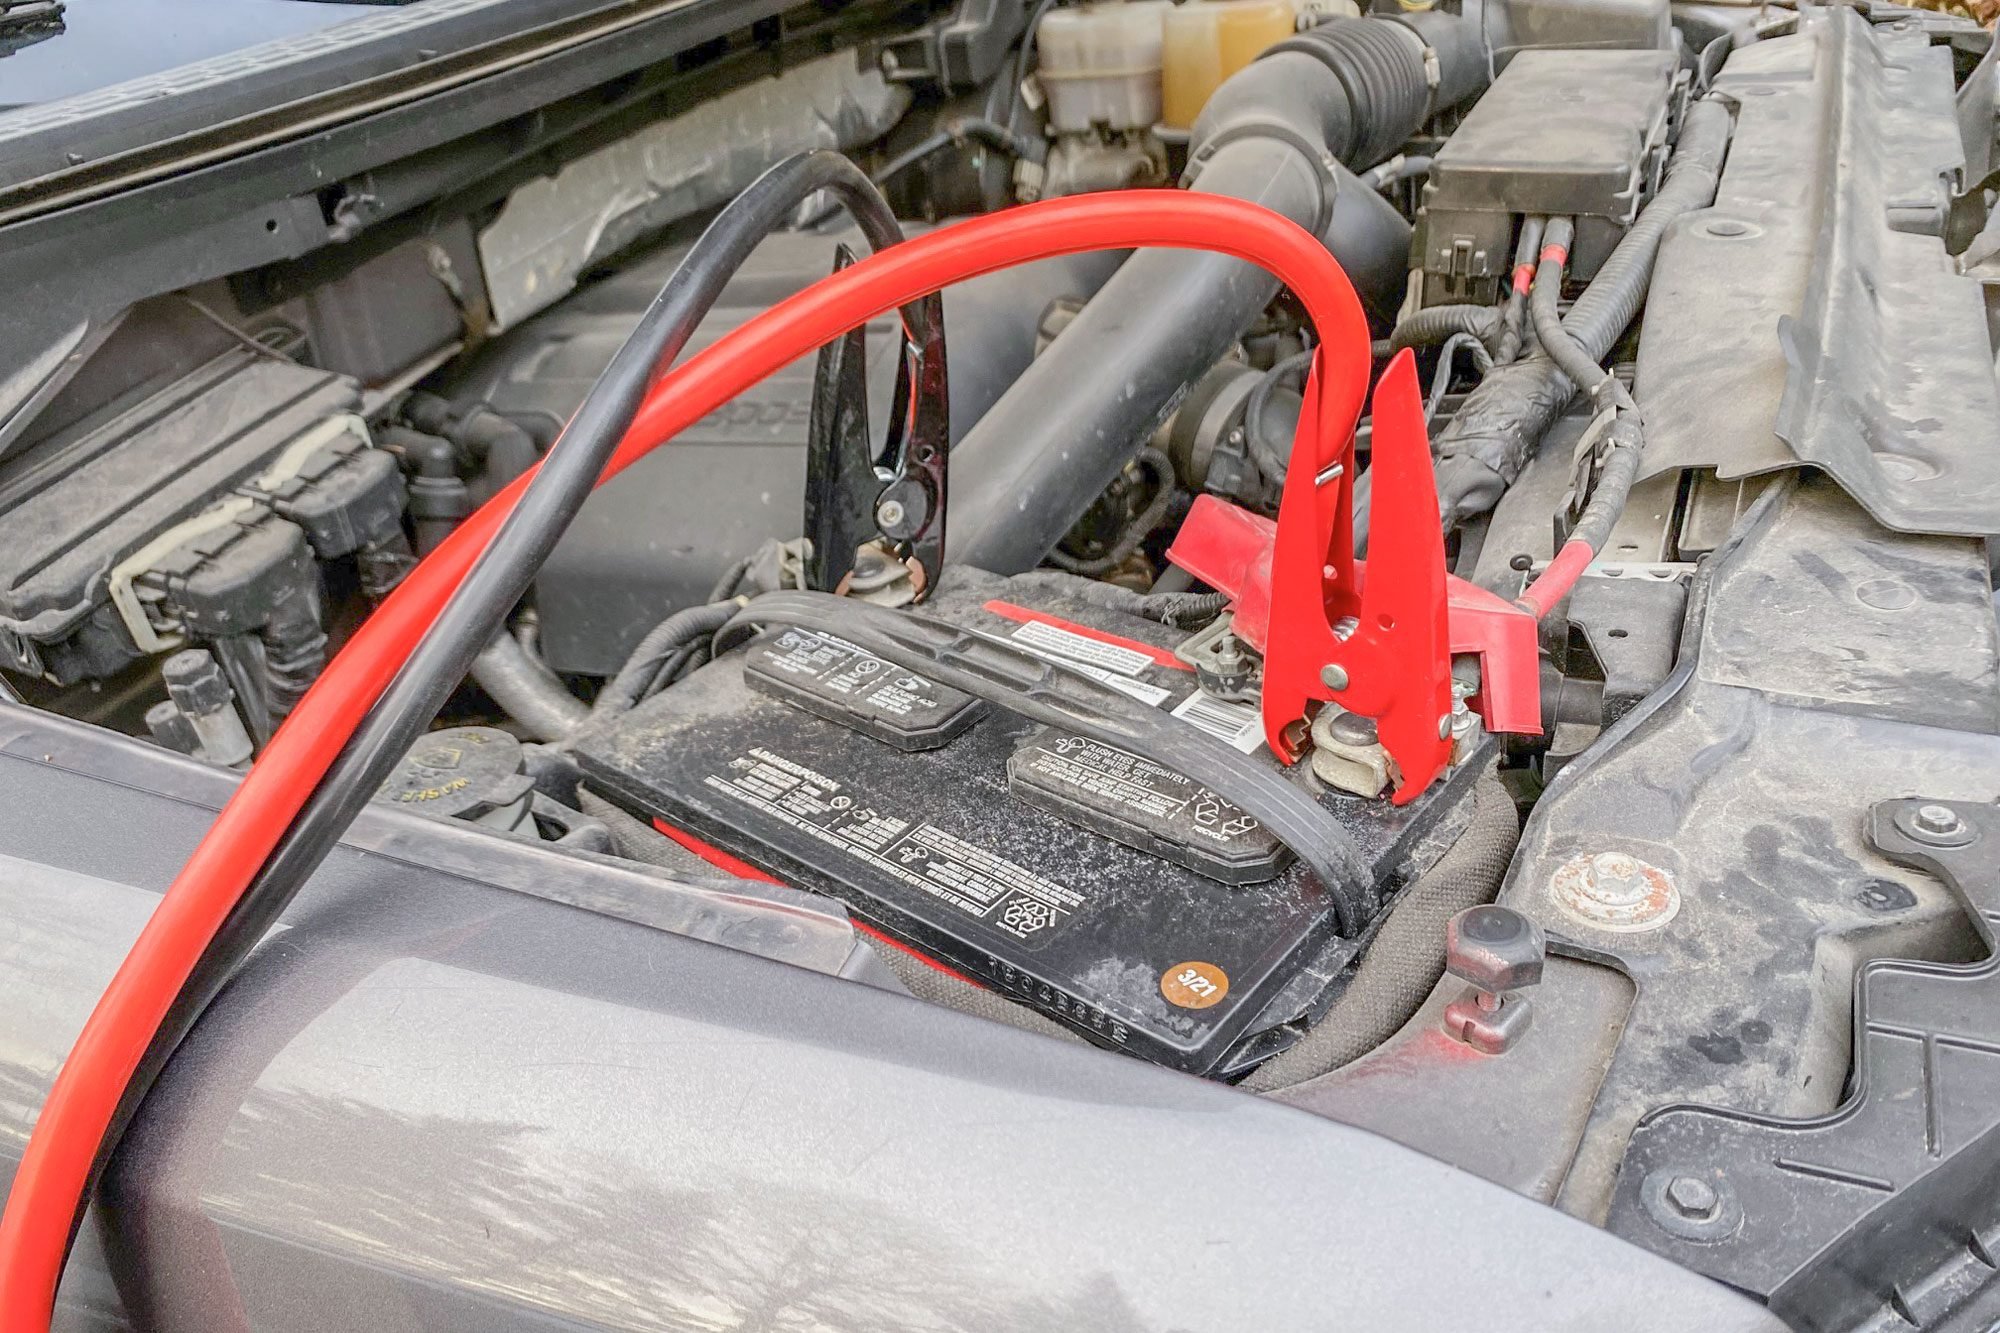 Read This Before You Sell Your Used Car Battery… - LOOP